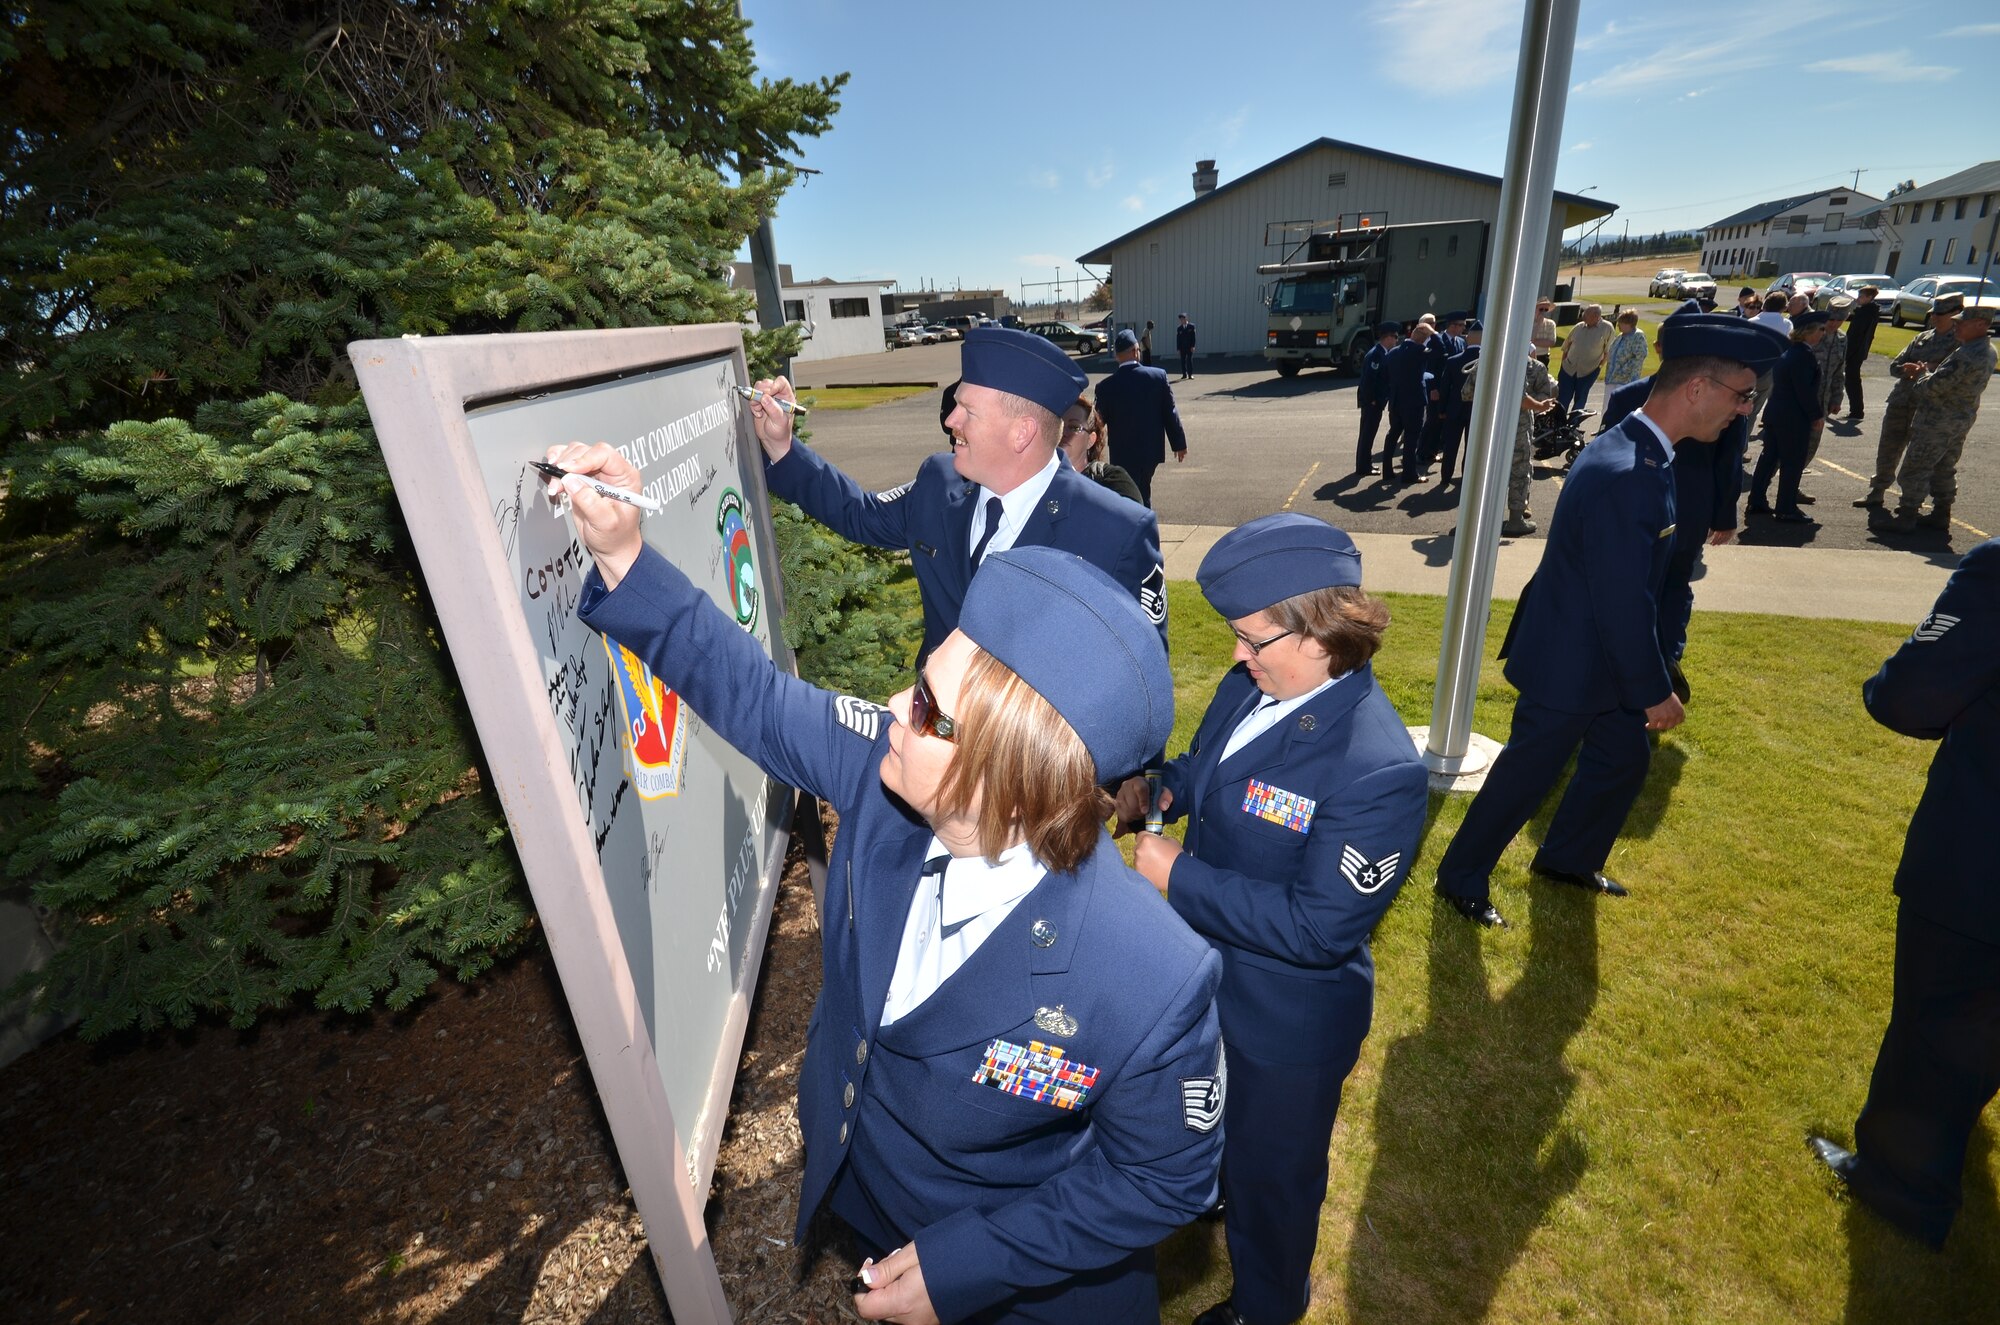 Members of the 242 Combat Communications Squadron write their names on the
squadron sign at the conclusion of the ceremony.